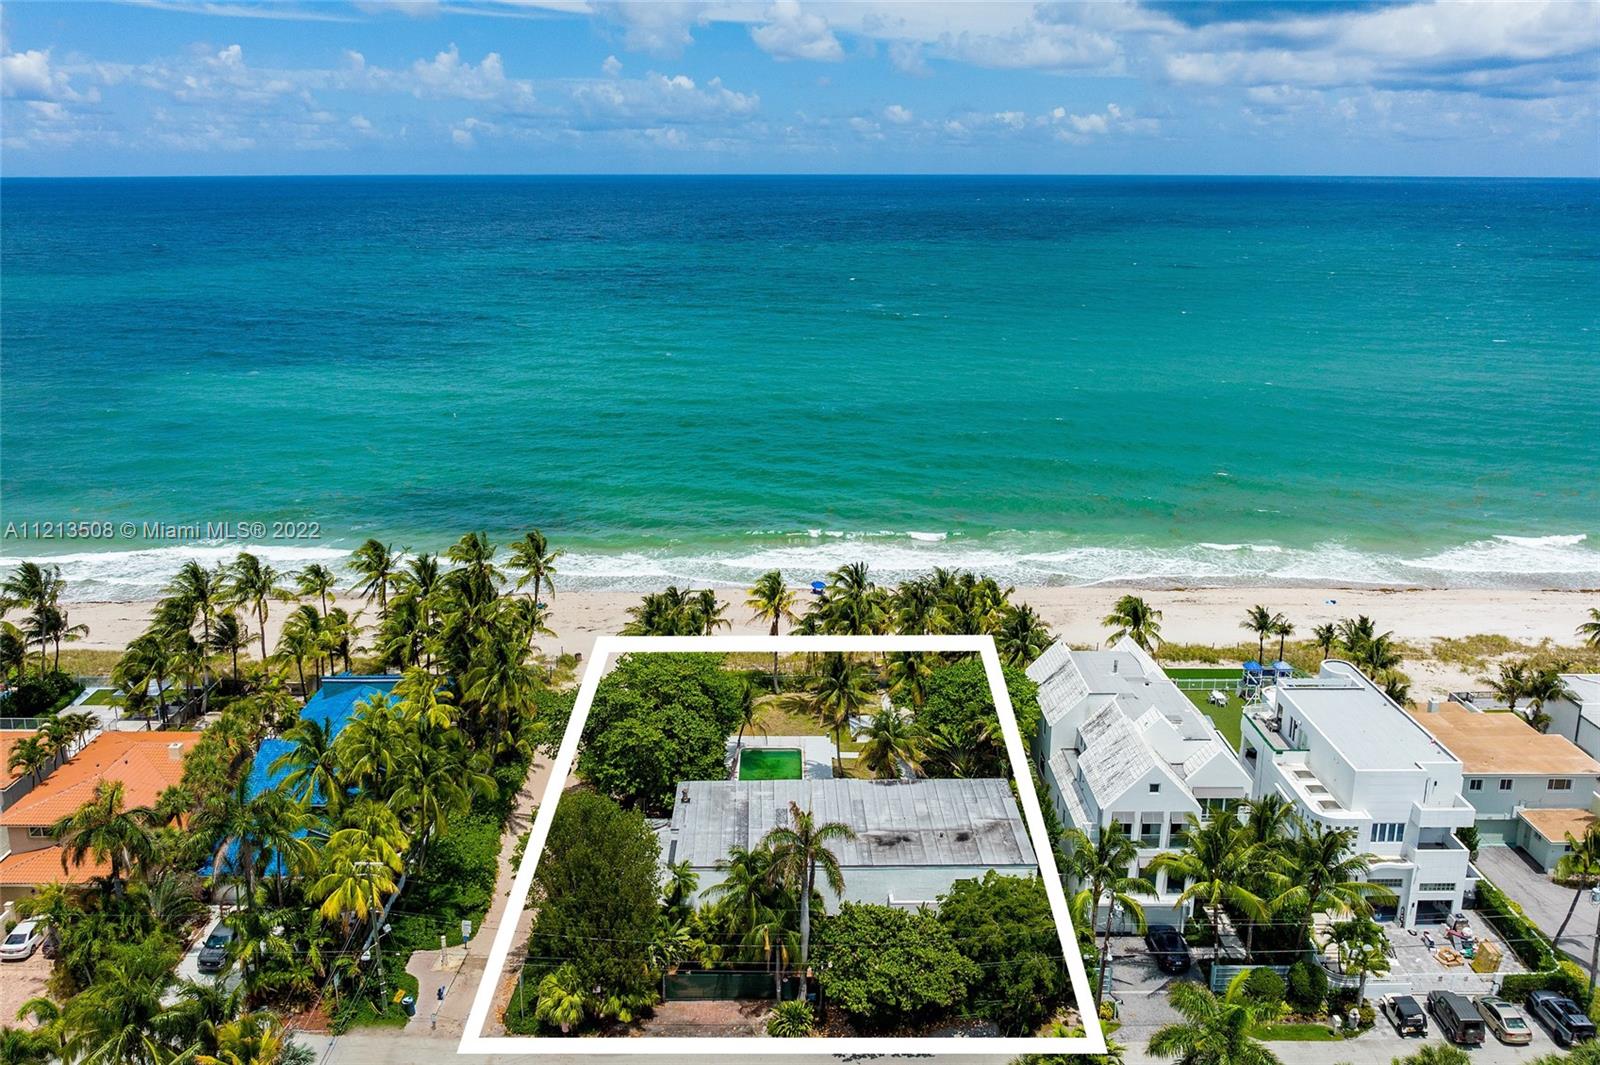 Take in the crystal blue water from this premier oceanfront lot positioned on the highly sought after Fort Lauderdale Beach. Nearly 1/2 an acre of land with 100 feet of beachfront access makes this the perfect opportunity to customize your dream home. Conveniently located just minutes away from International airports, Fort Lauderdale’s top restaurants, resorts, top country club, and exclusive yacht club. Don’t miss out on this once in a lifetime opportunity!